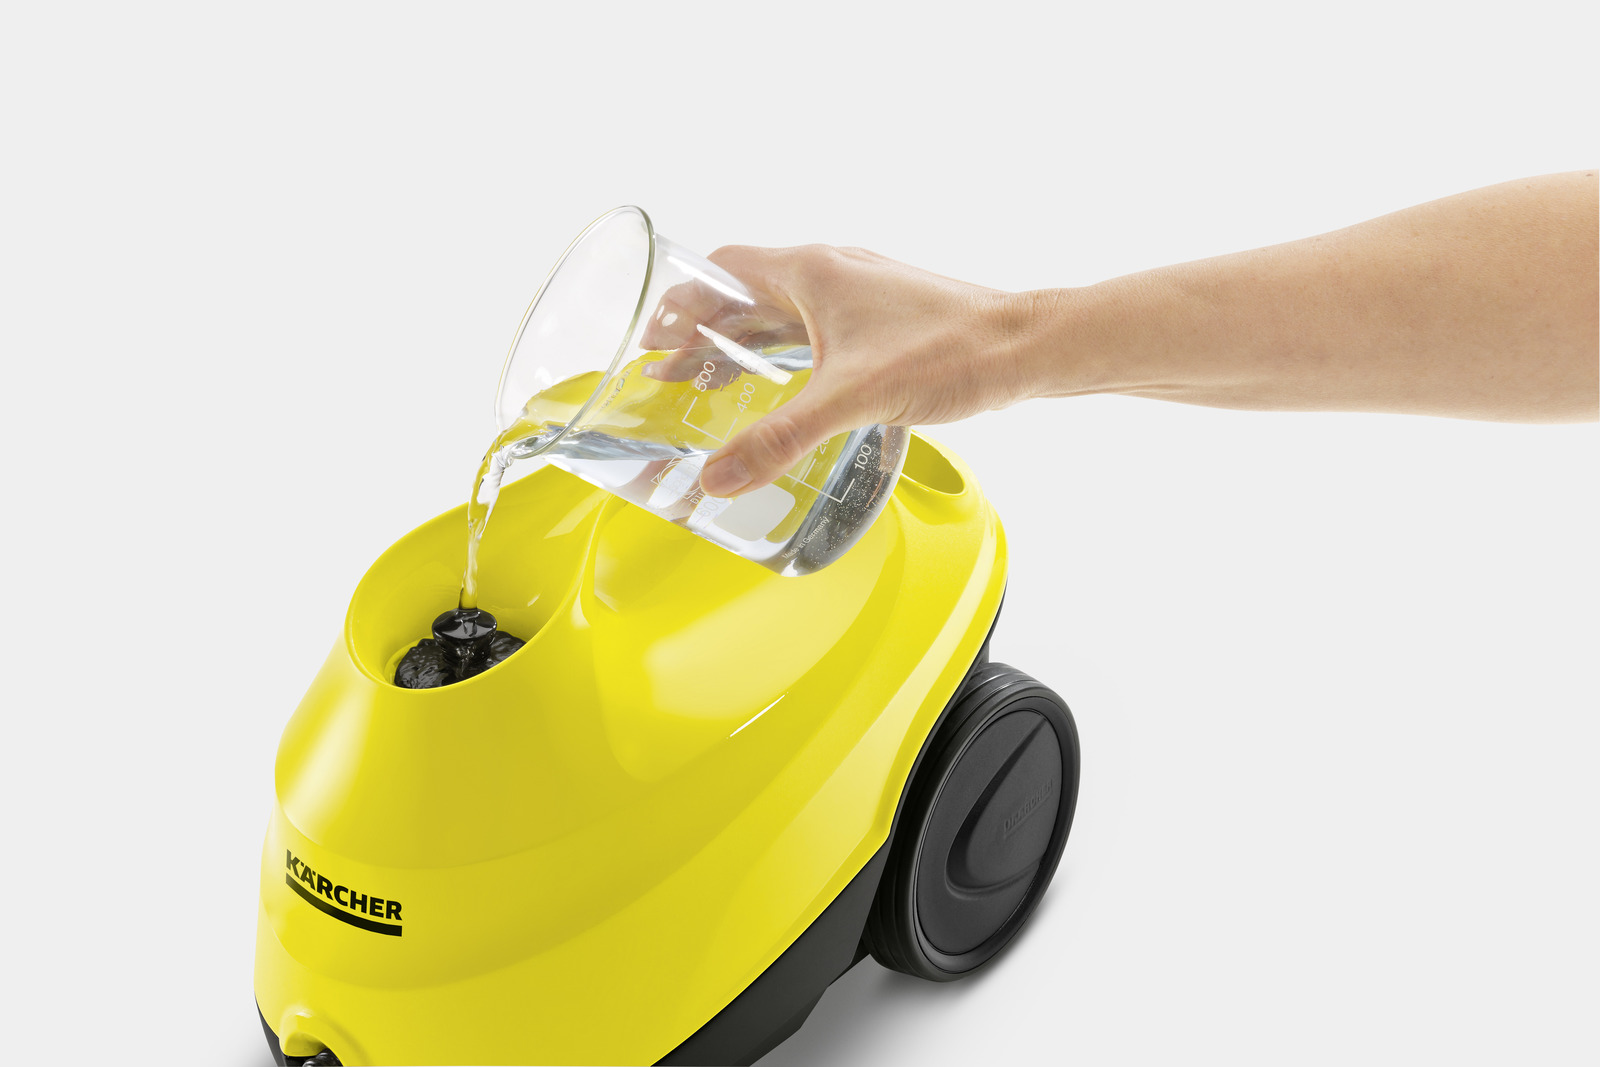 mop used Details about   Karcher SC 3 EasyFix Steam Cleaner house cleaning open box 